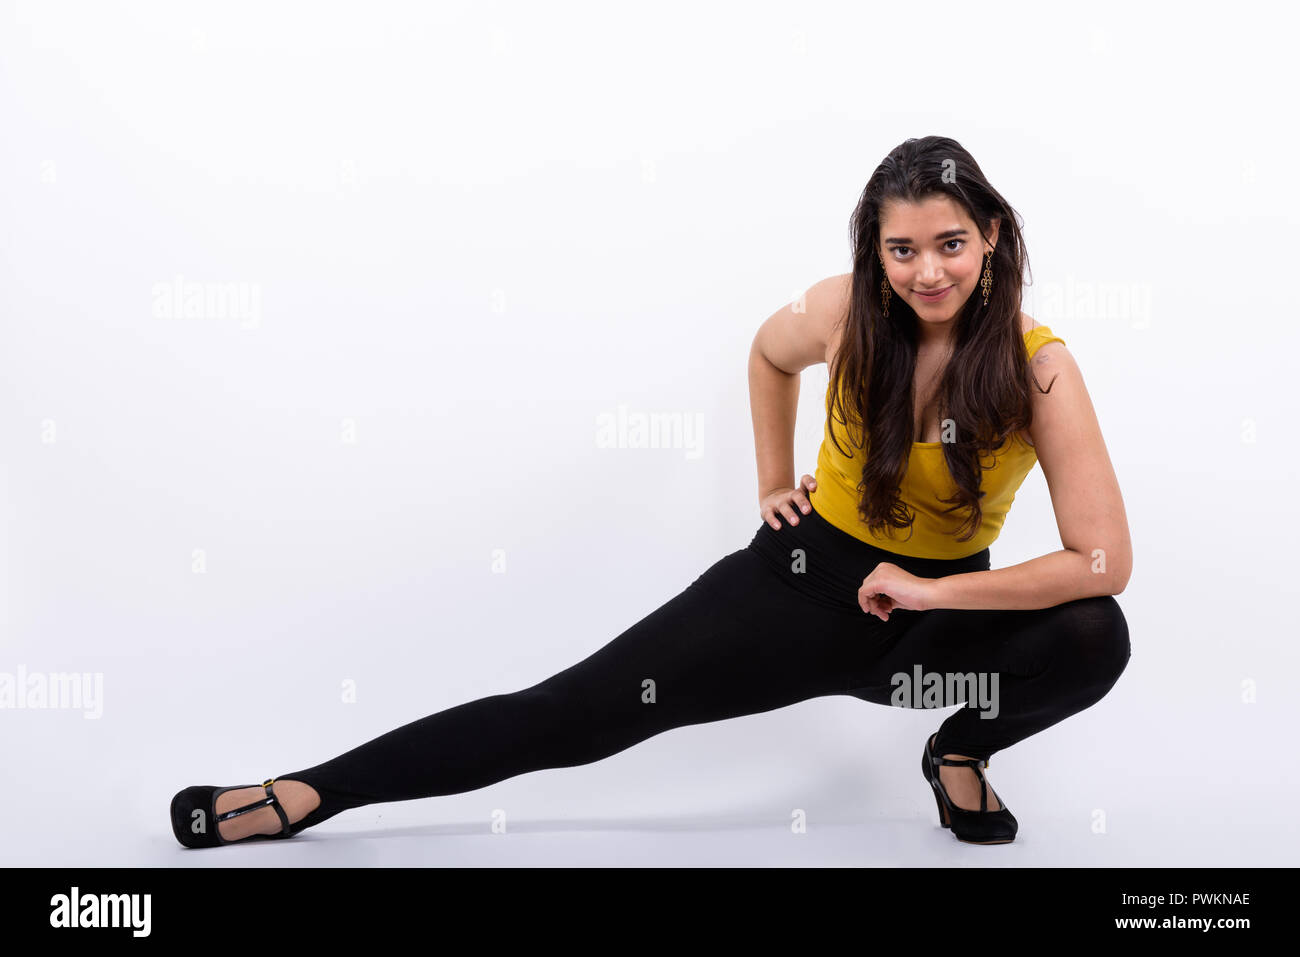 Full body shot of young beautiful Indian woman posing down on th Stock Photo